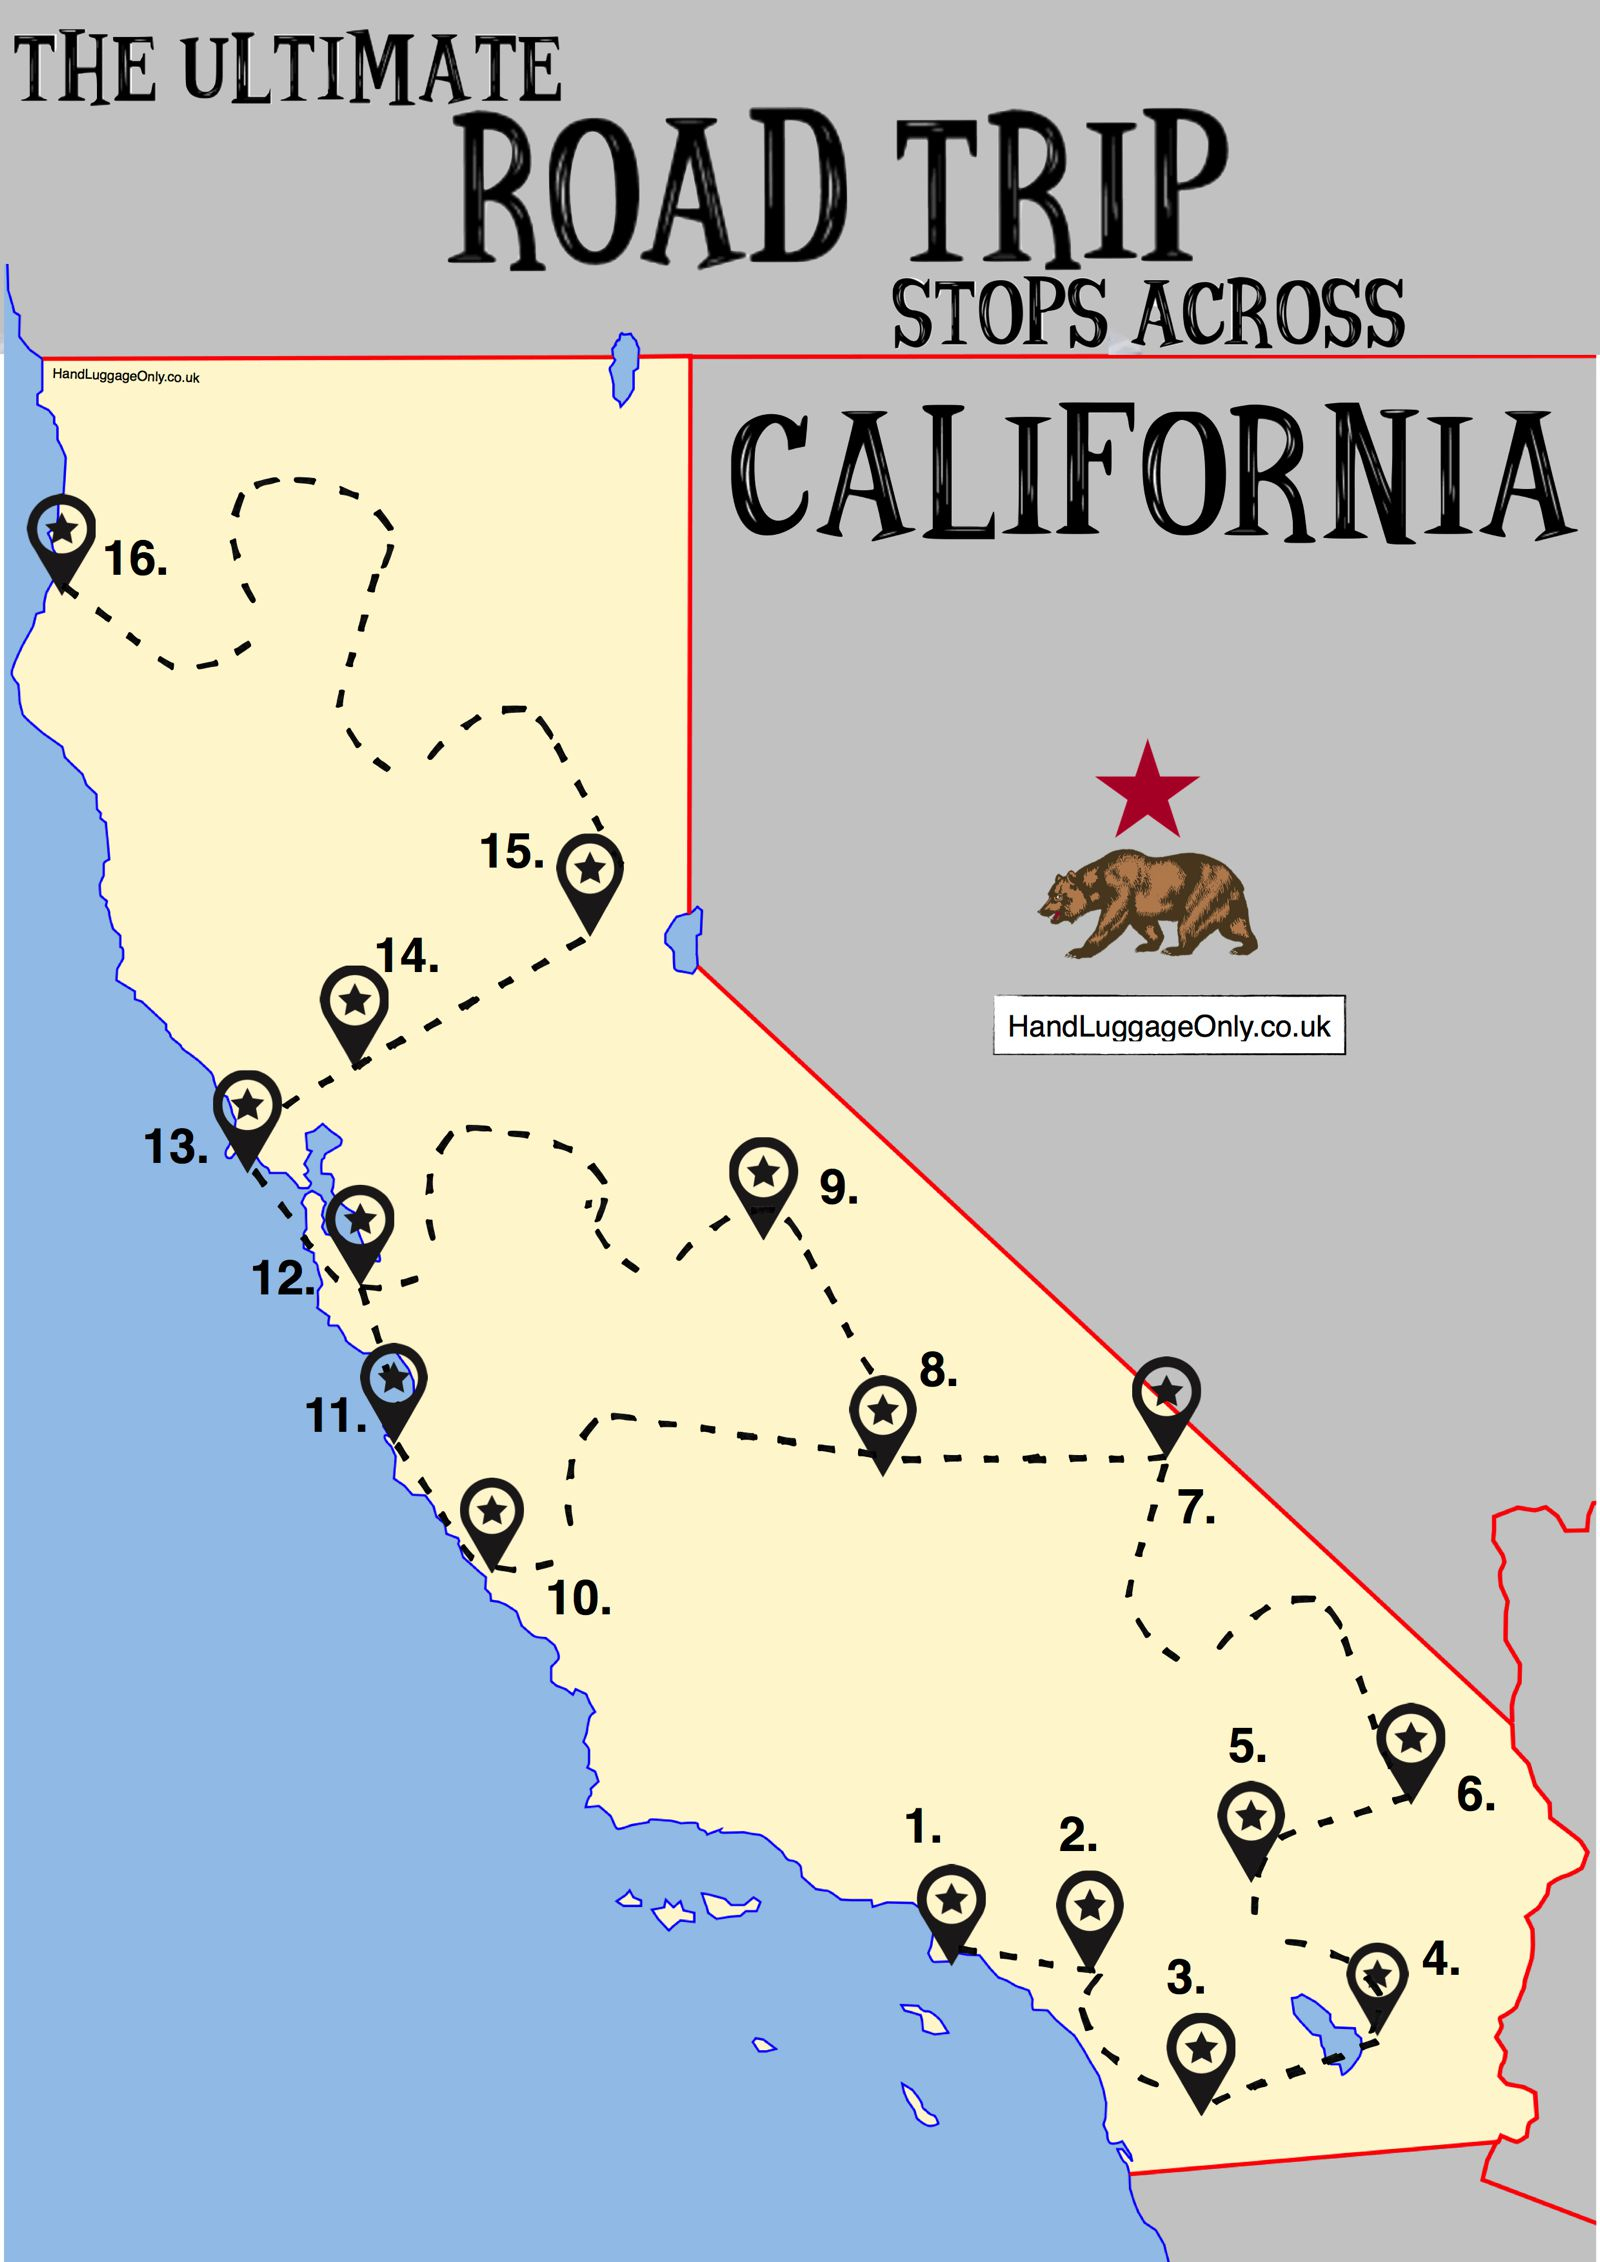 The Ultimate Road Trip Map Of Places To Visit In California - Hand - California Road Trip Trip Planner Map